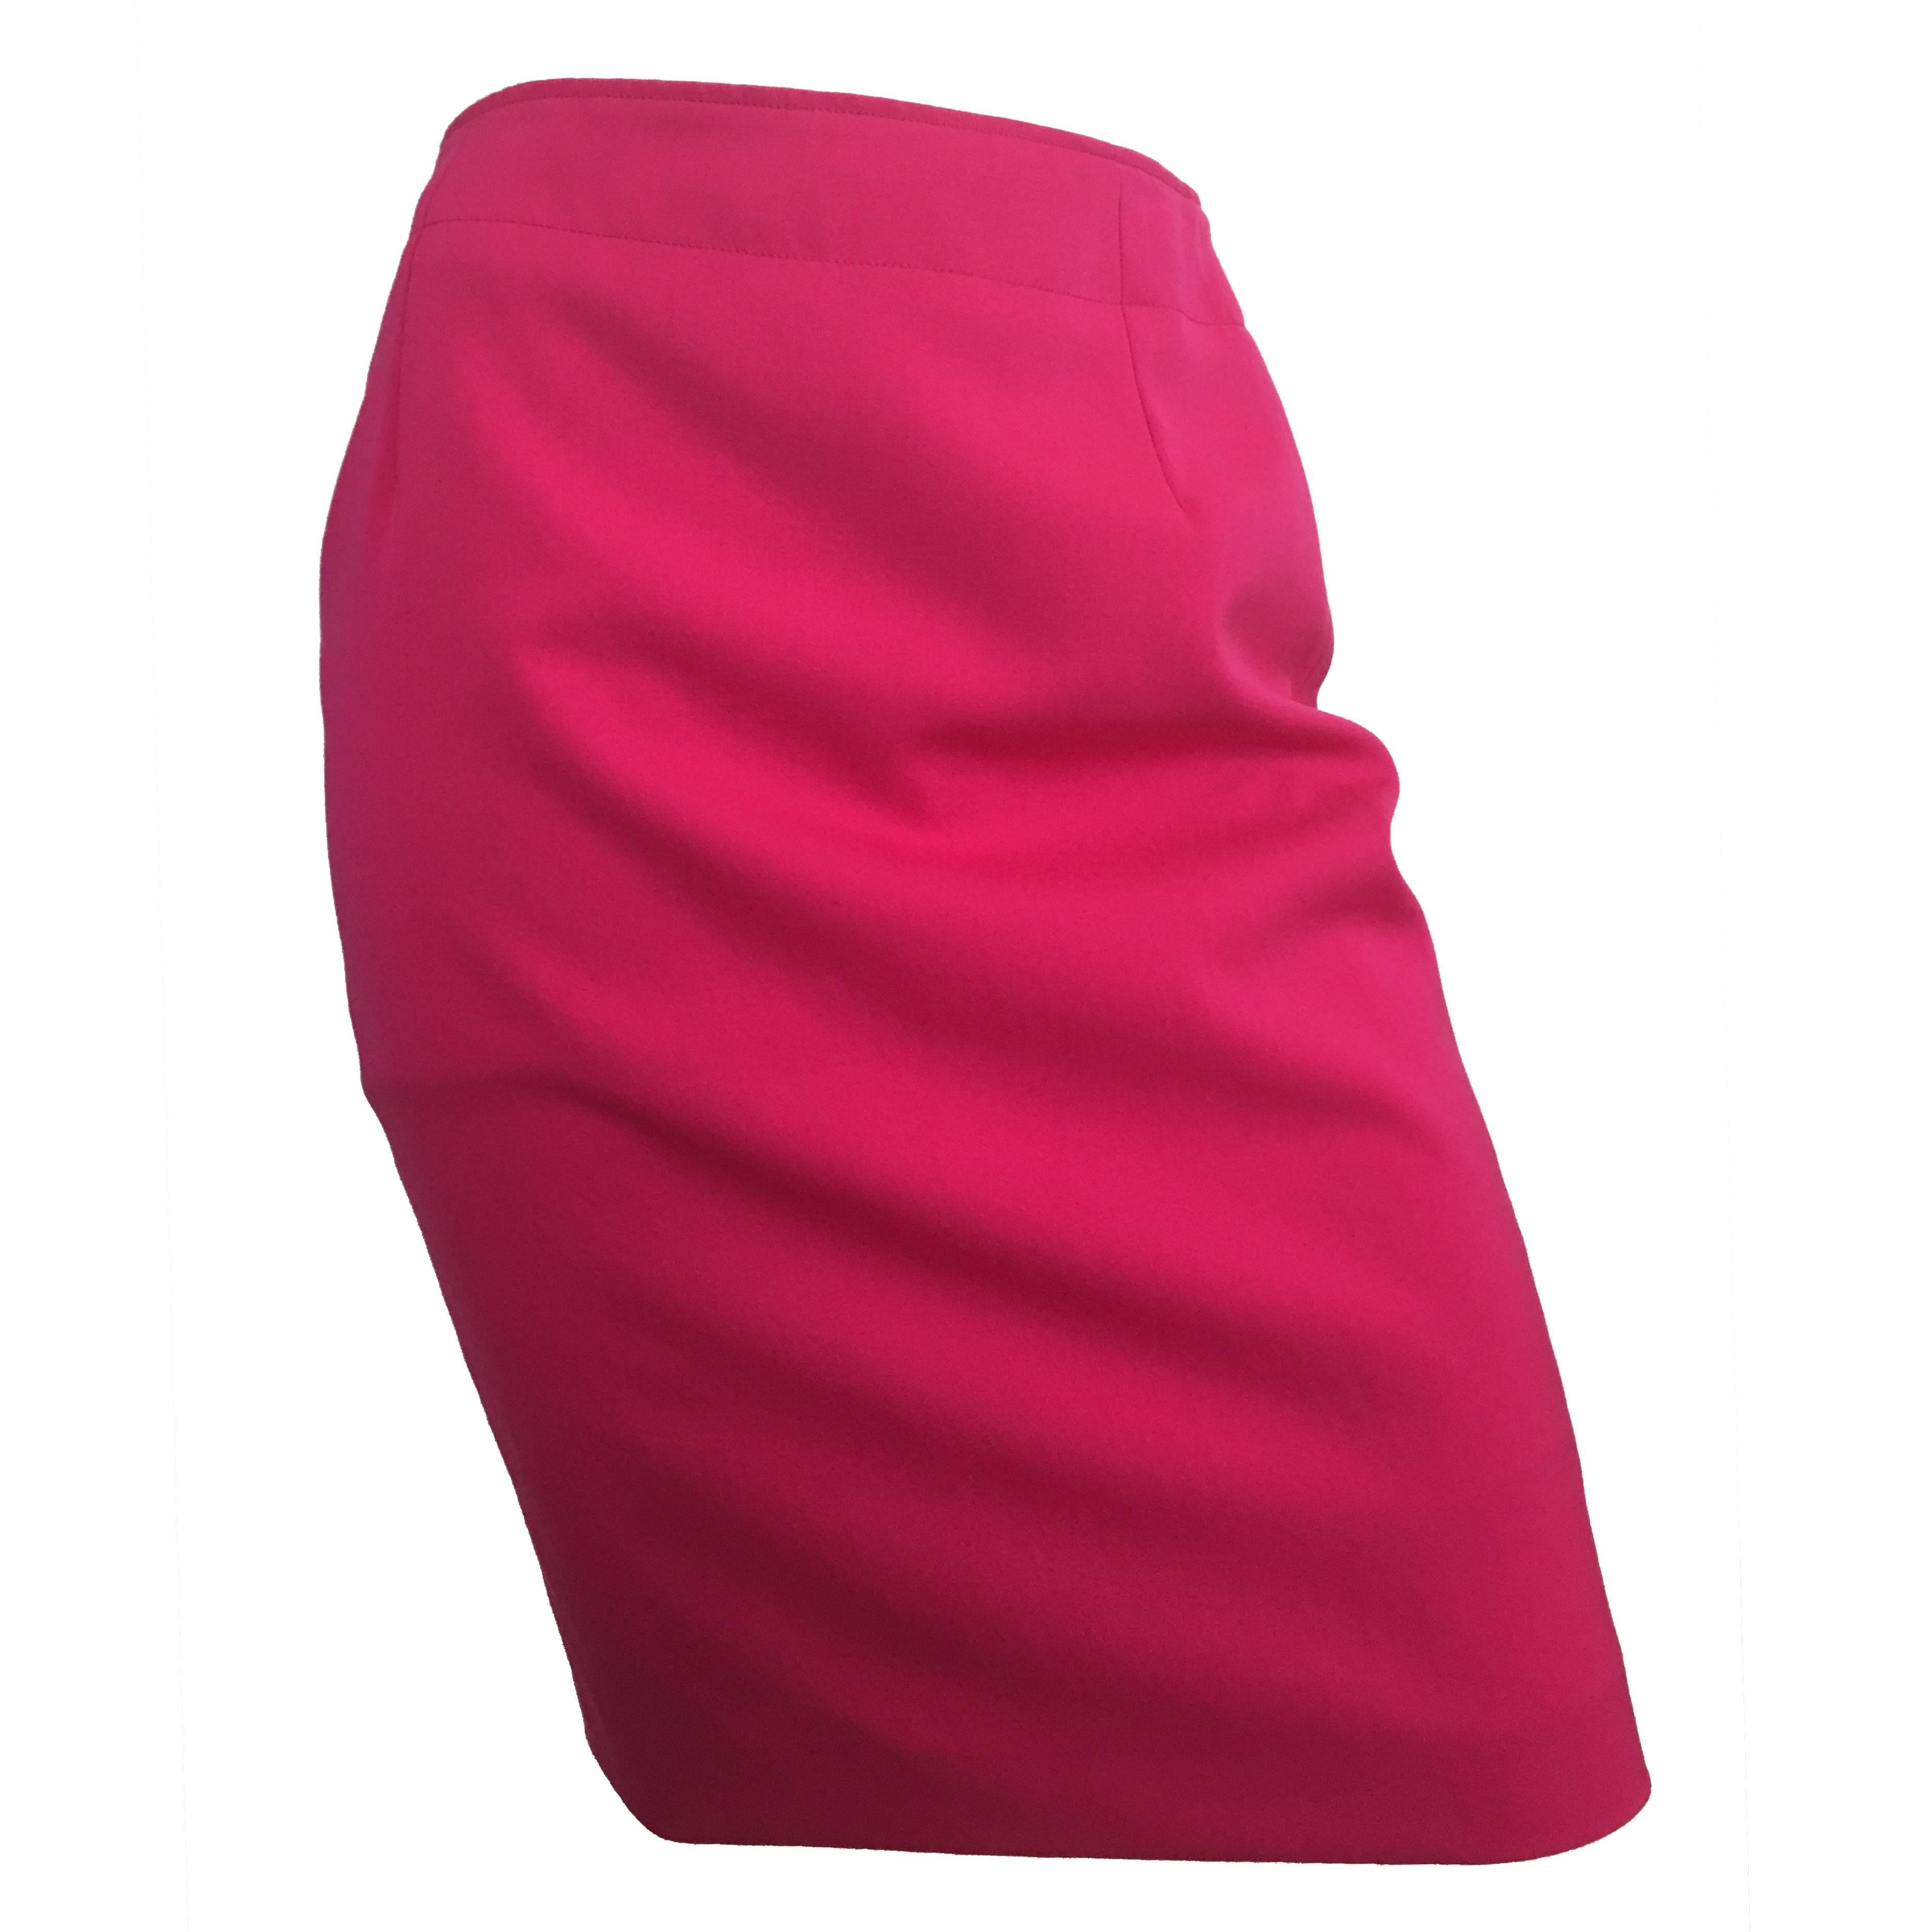 Lolita Lempicka Wool Pink Sexy Pencil Skirt Size 6. For Sale